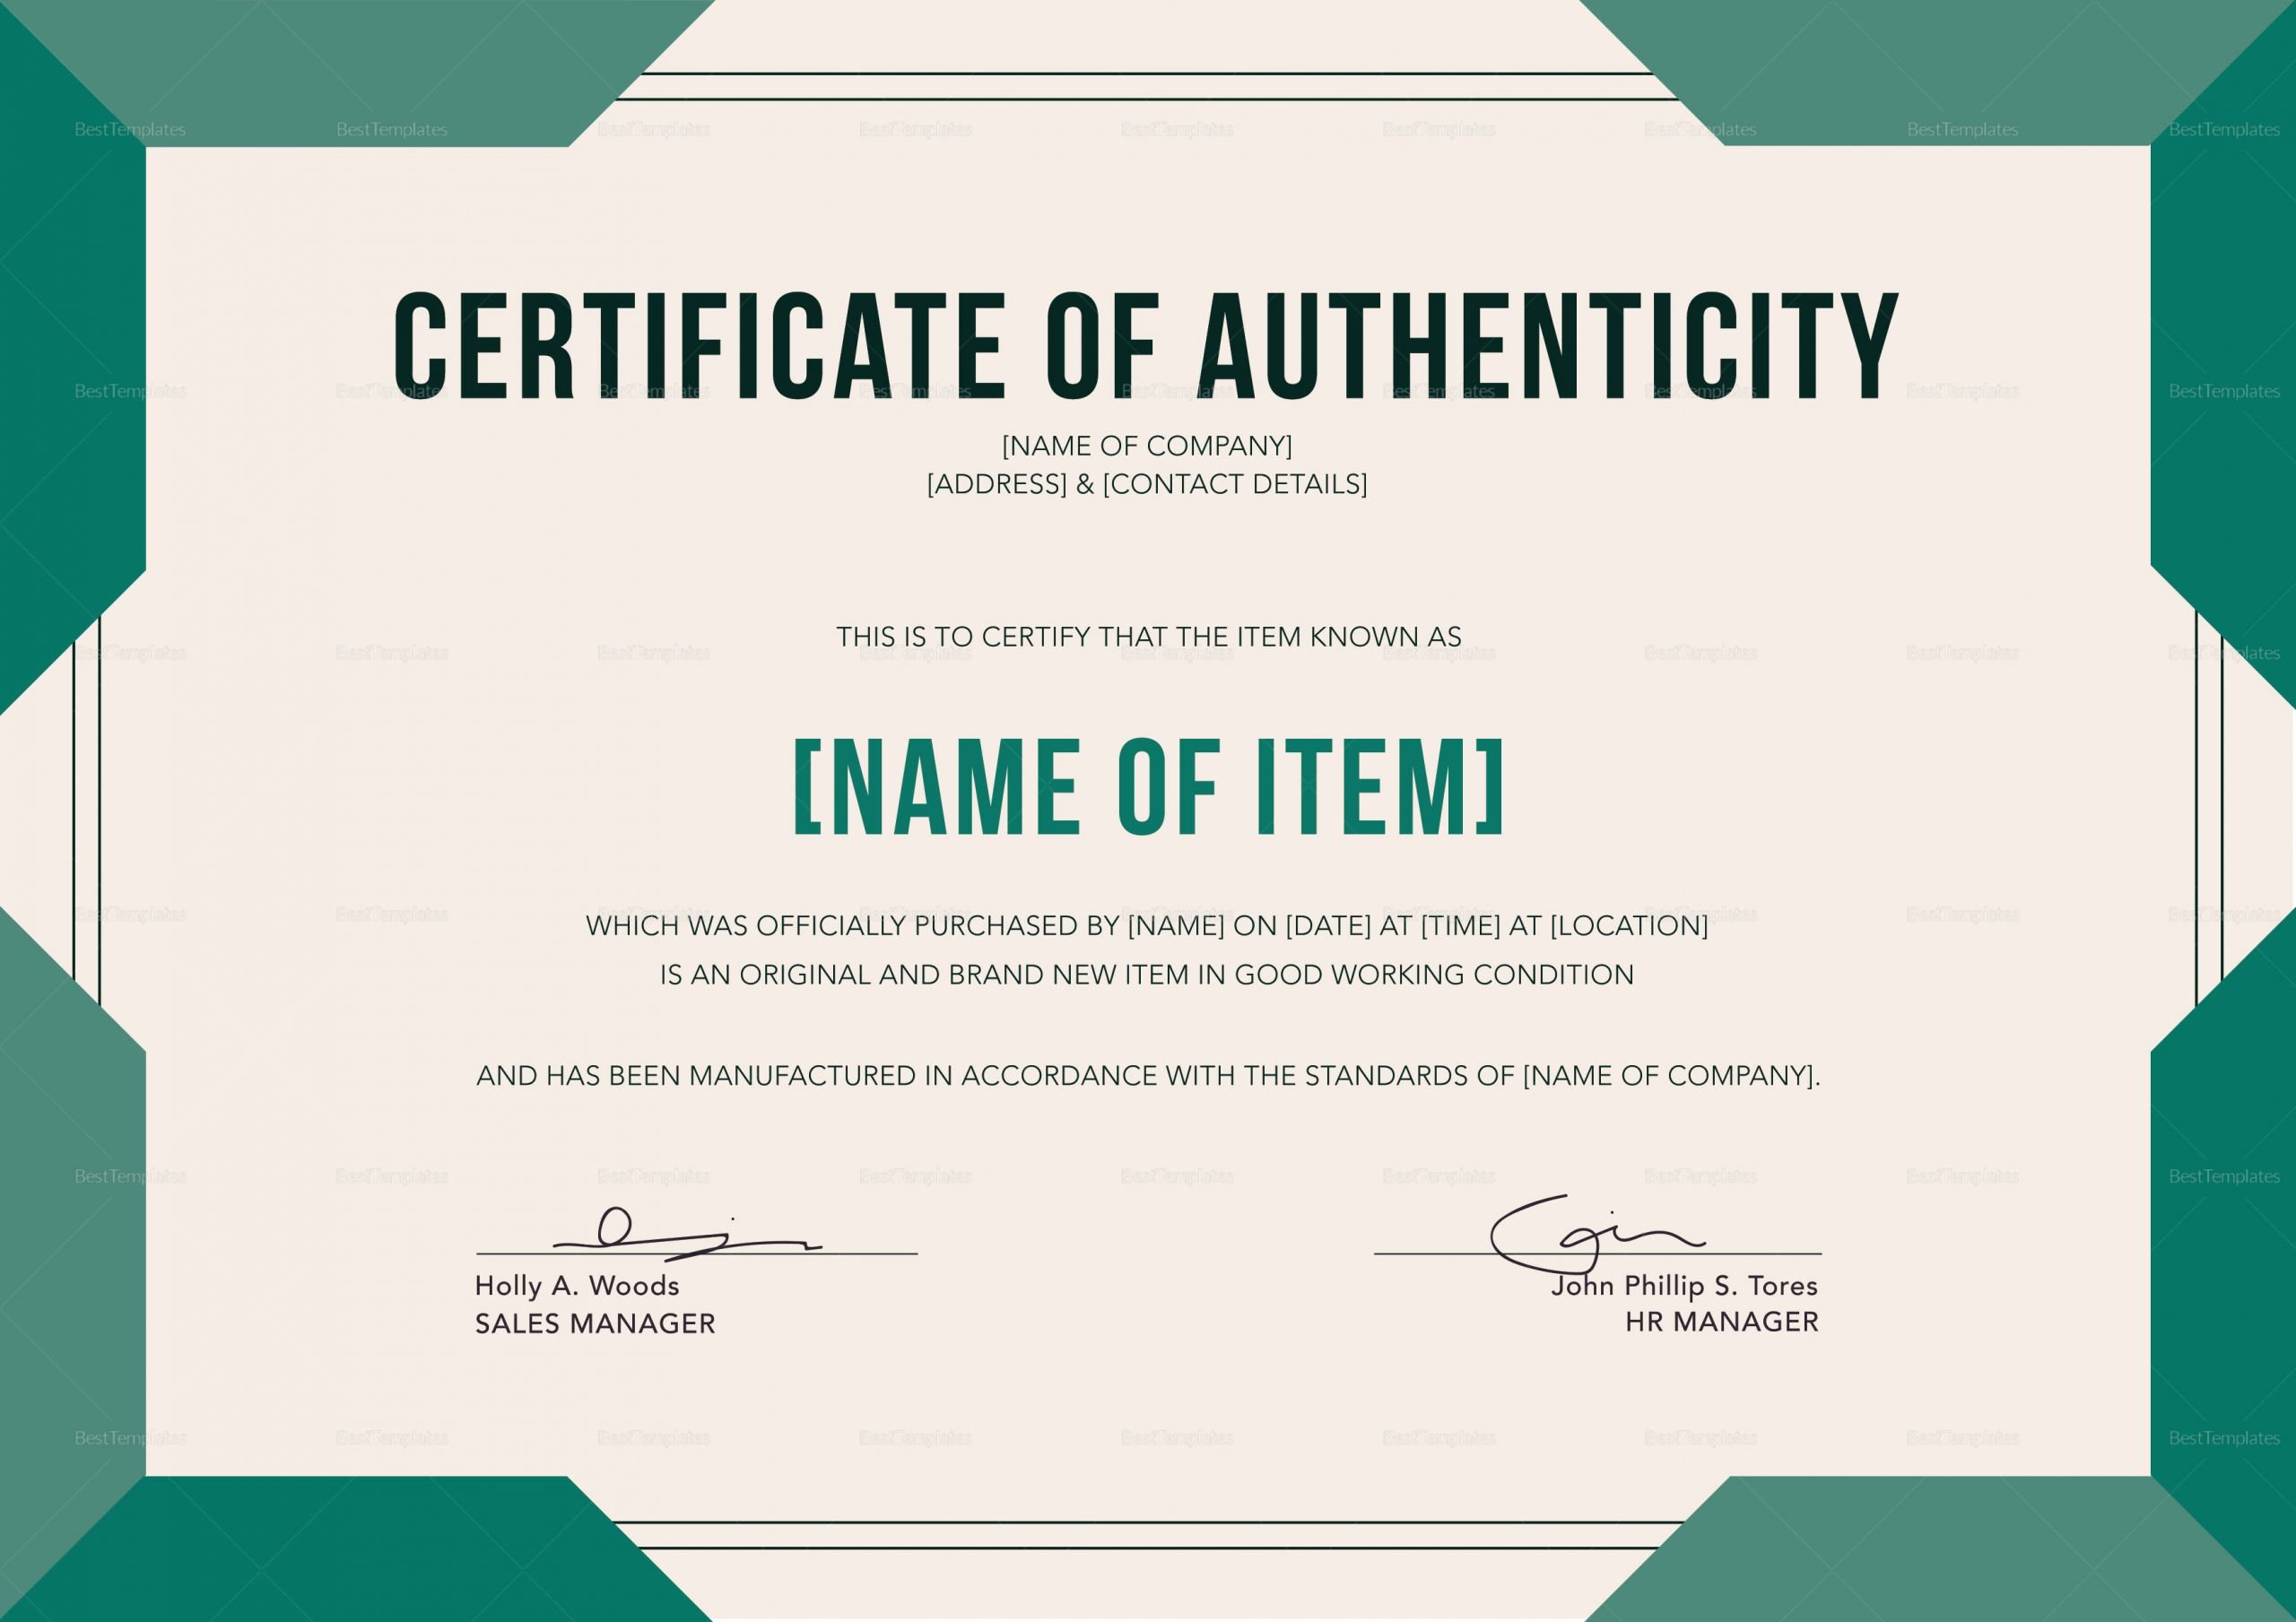 Certificate Of Authenticity Template Free Beautiful Elegant Certificate Of Authenticity Design Template In Psd